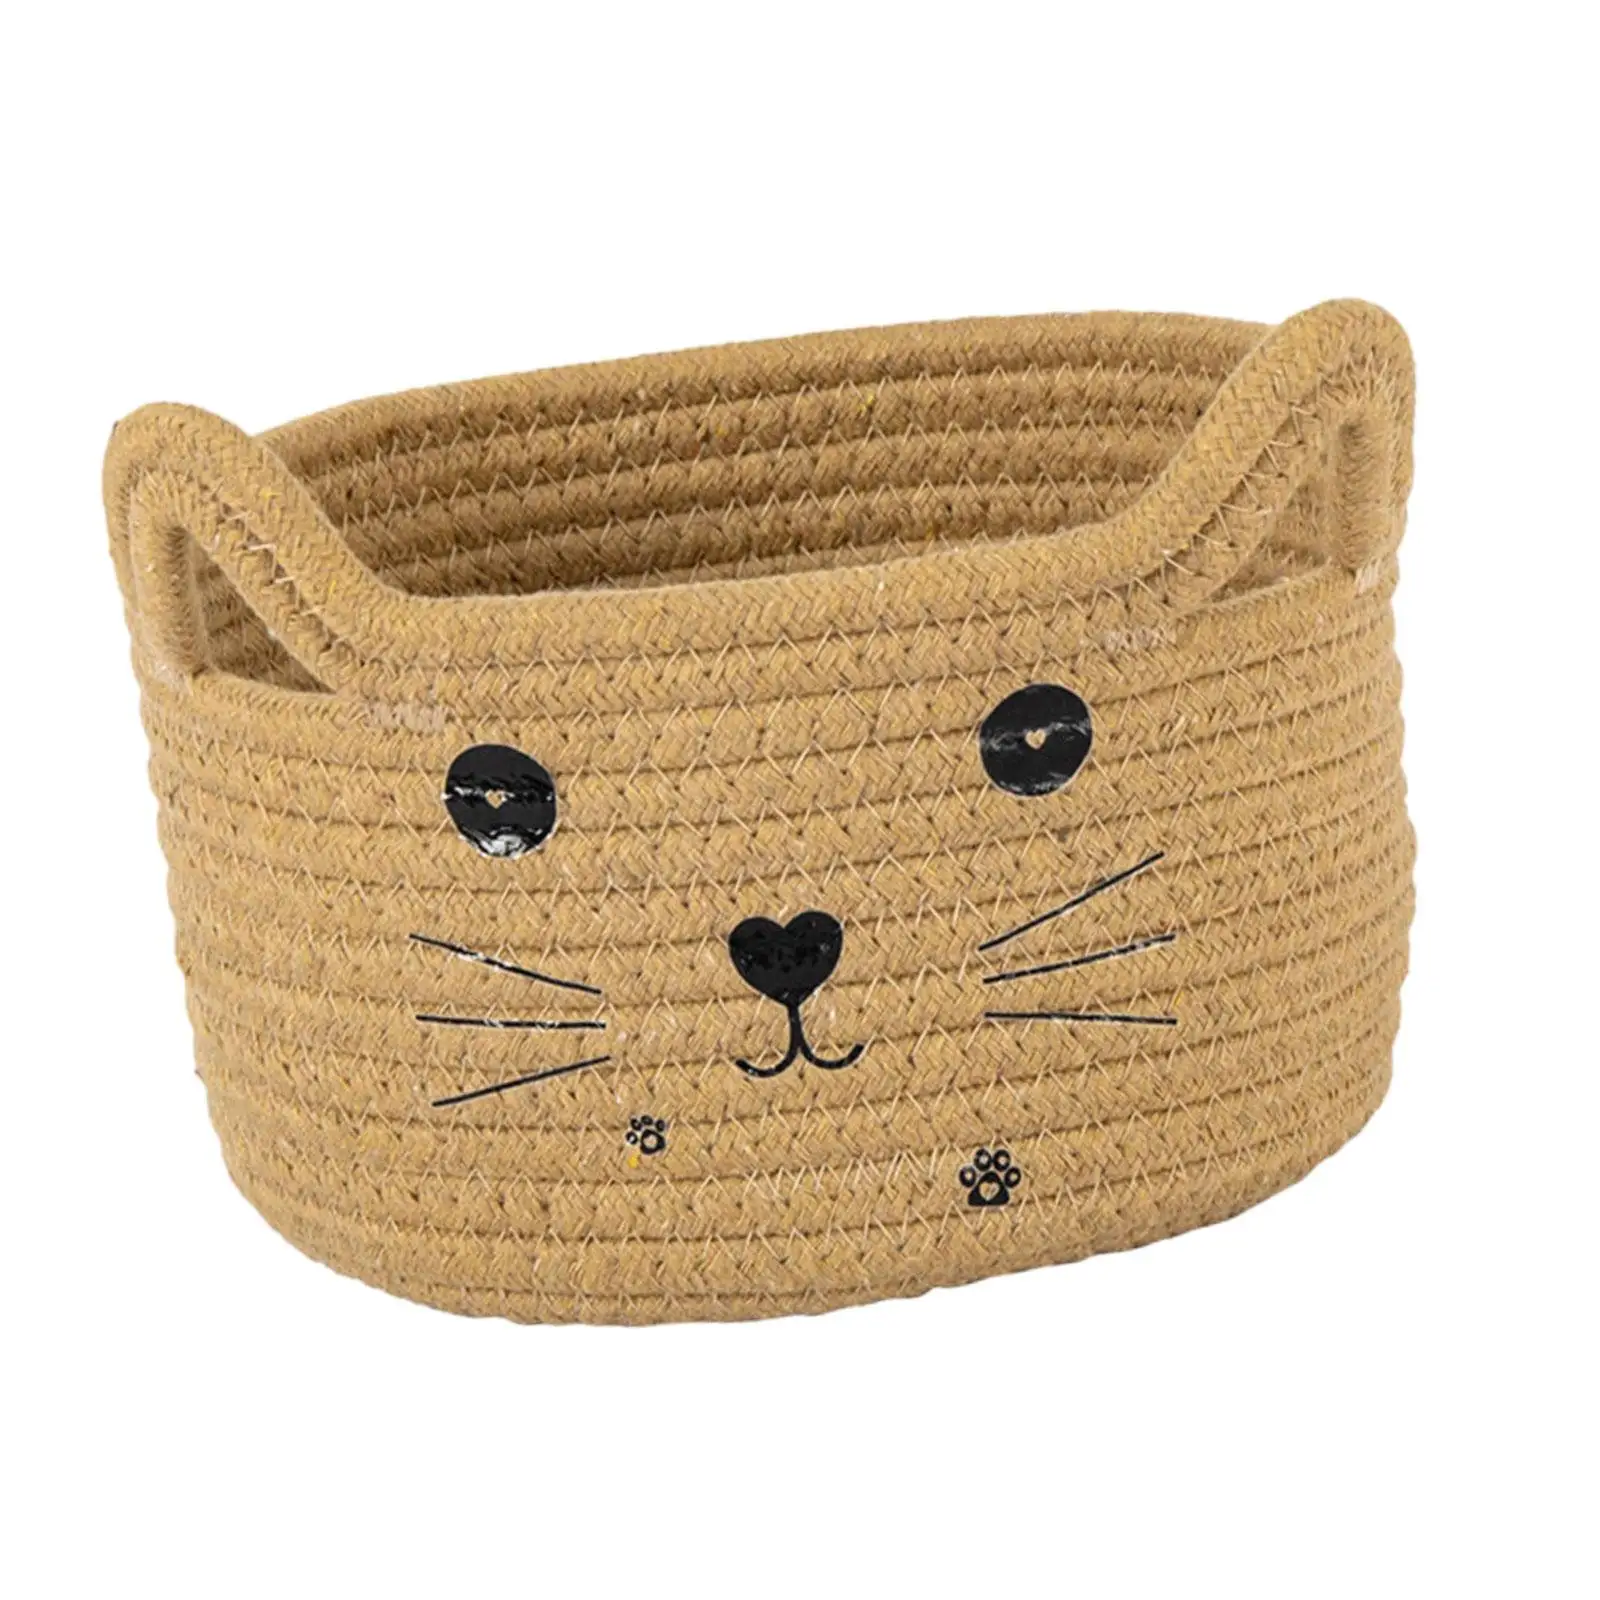 Cat Storage Basket Space Saving with Ears Multipurpose Countertop Hand Woven for Pastries Snacks Cosmetics Breakfast Sundries